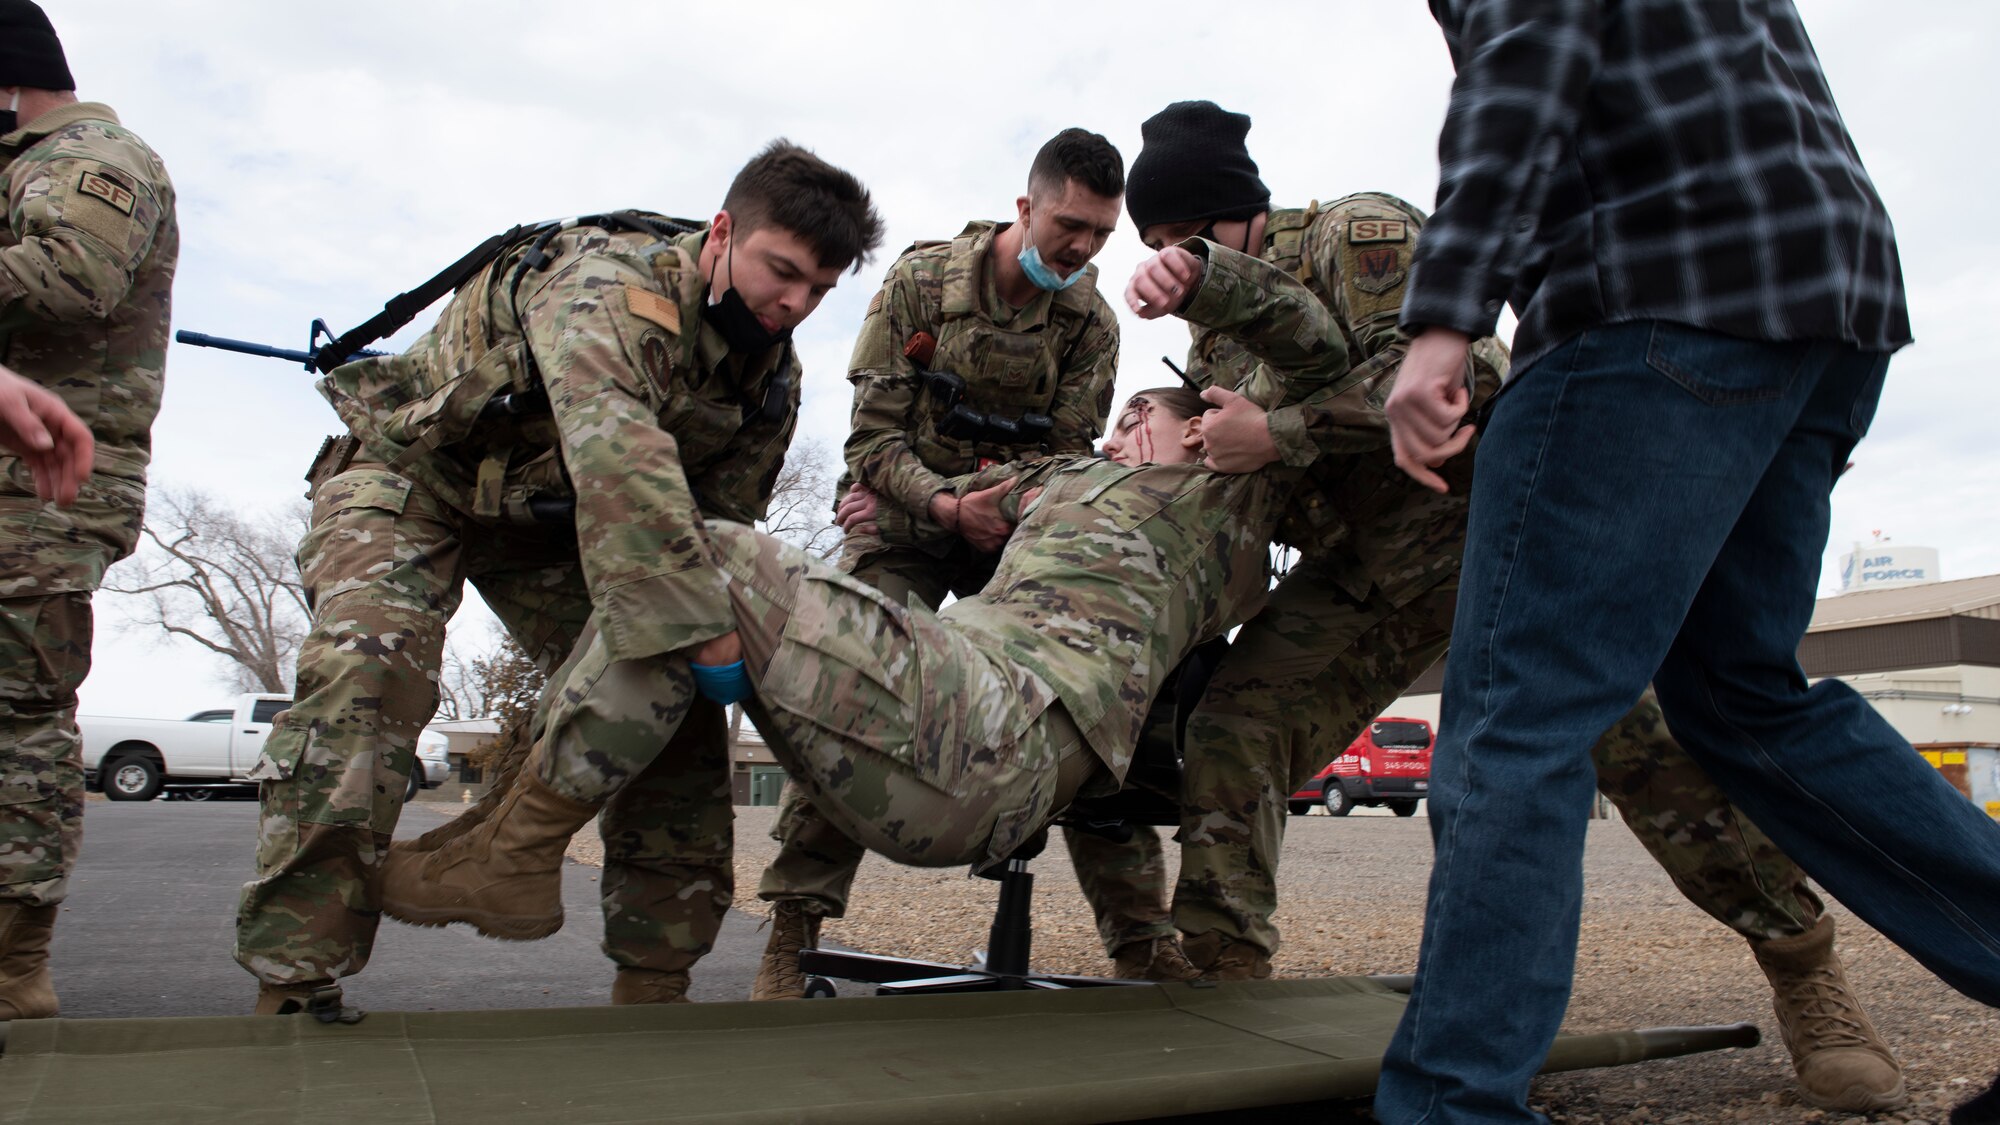 A group of Airmen lowers a simulated, injured Airman to a stretcher.